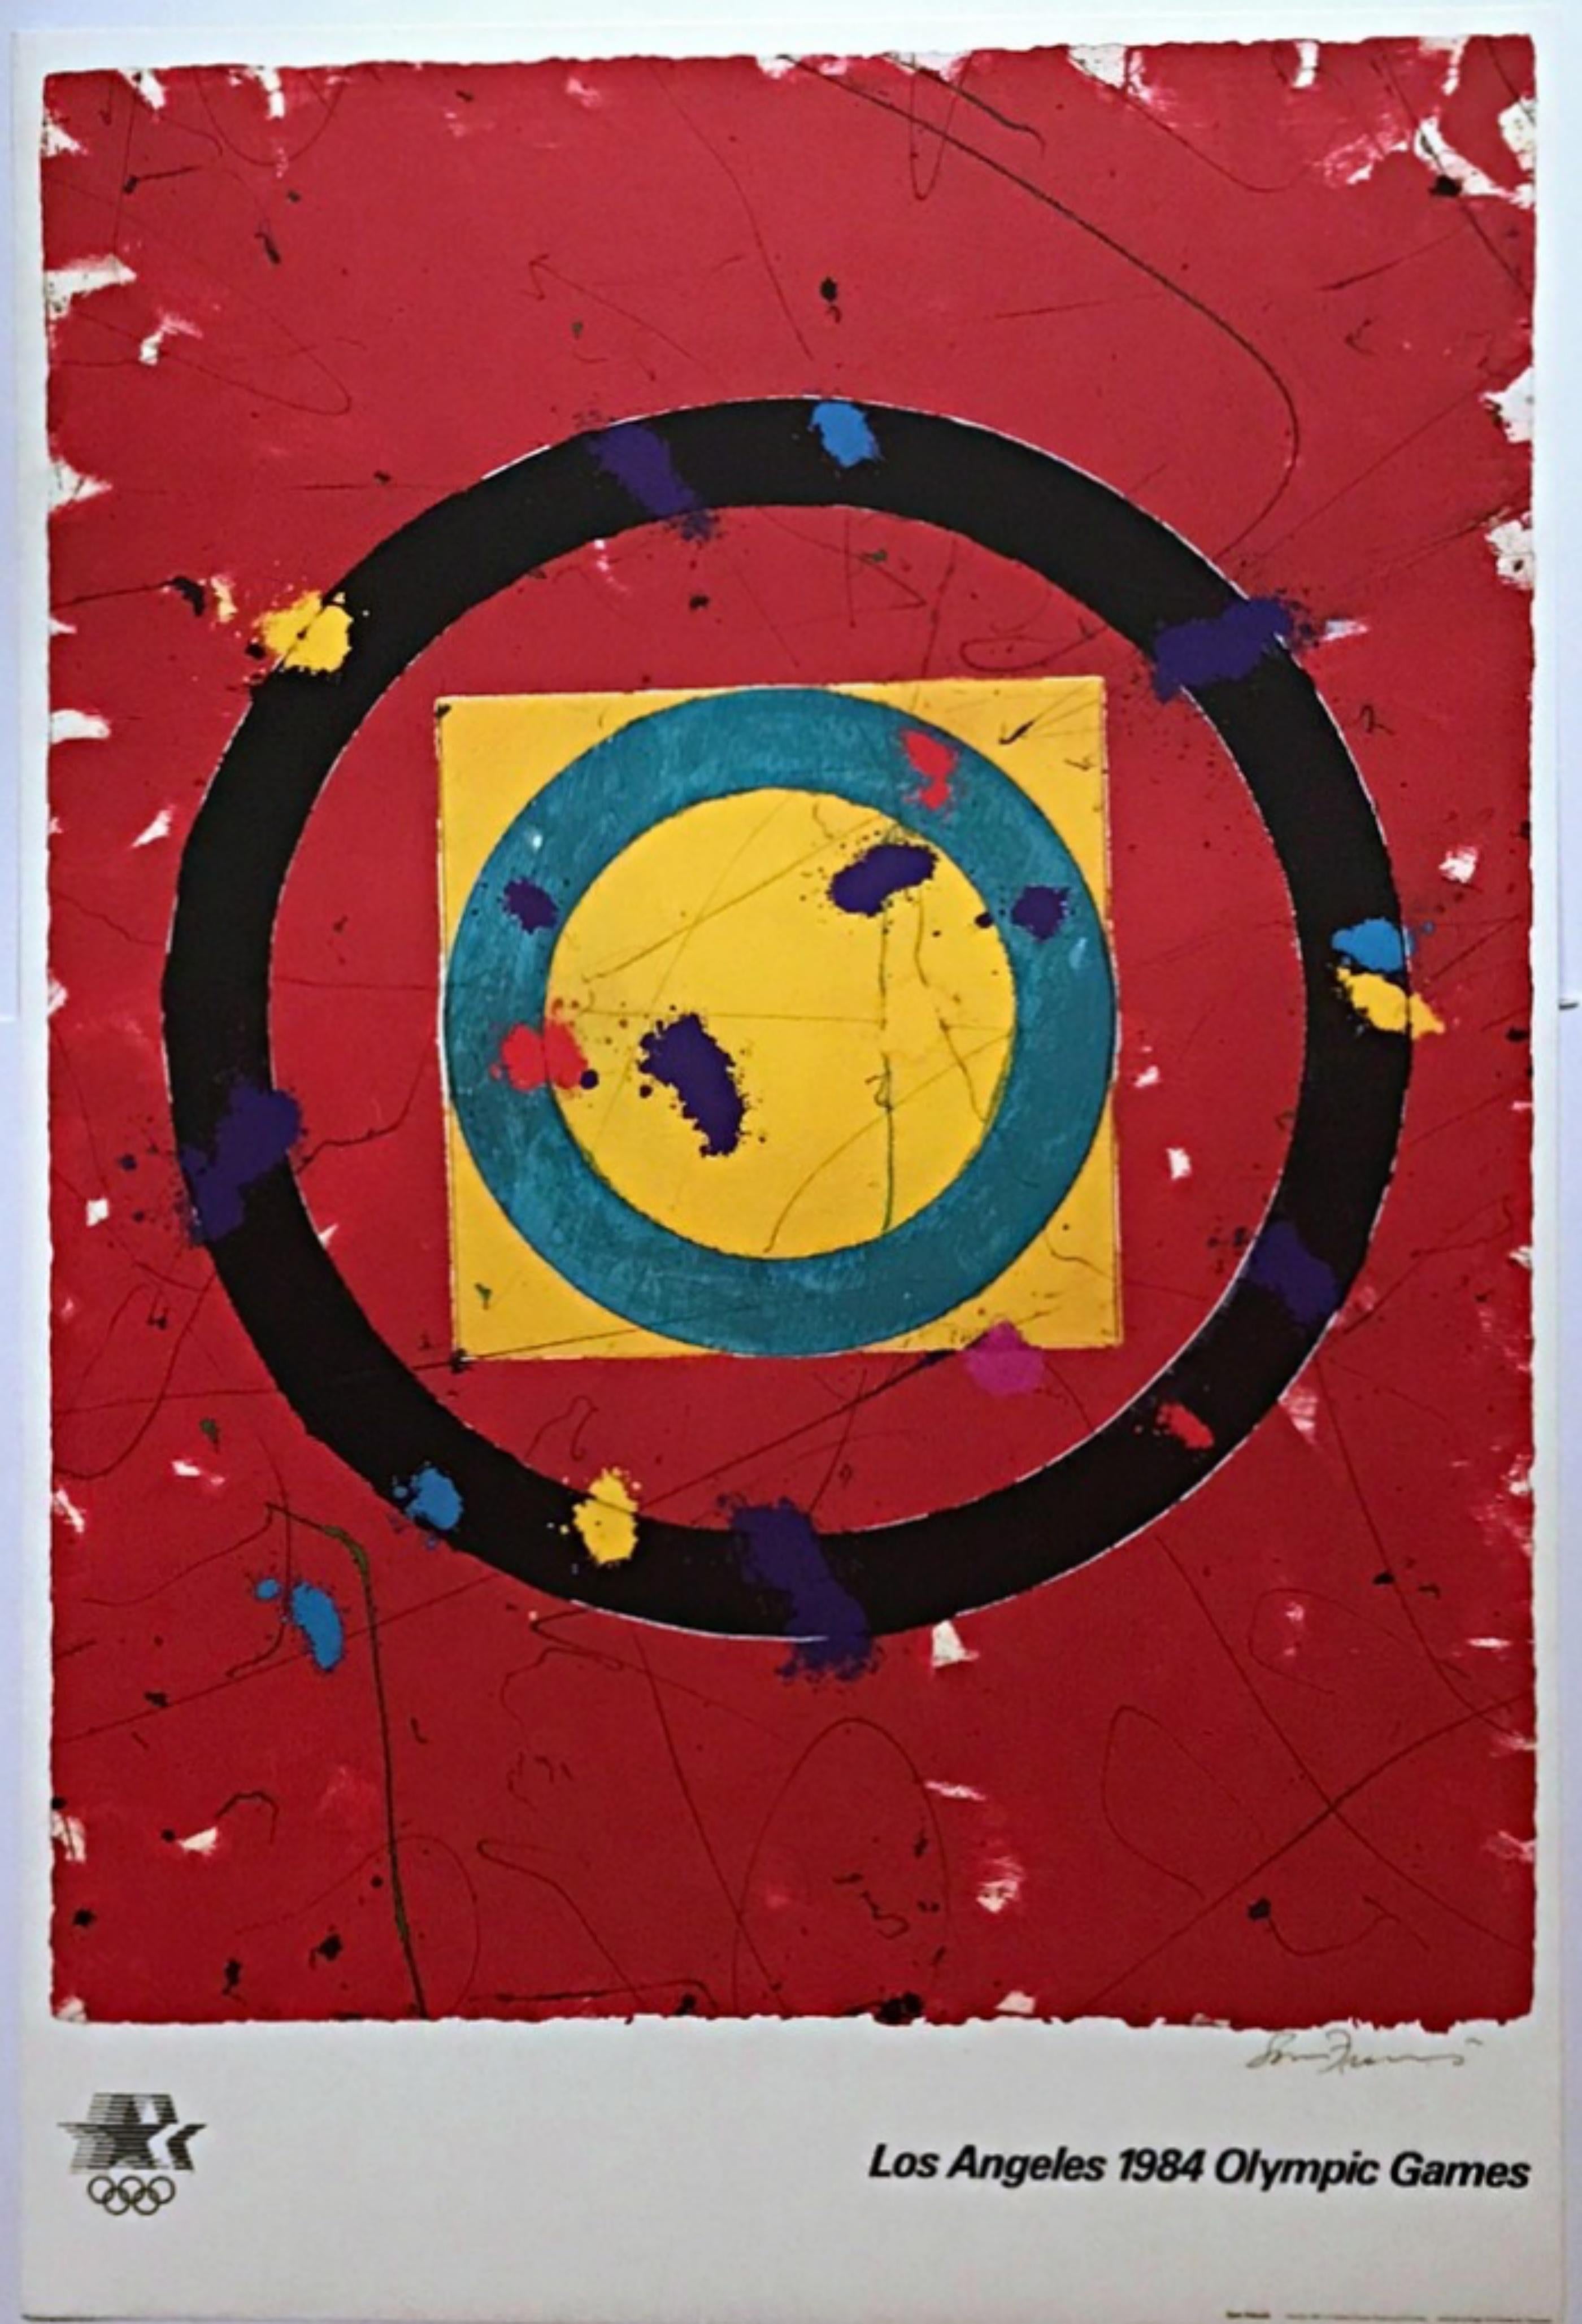 Sam Francis Print - Lt Ed. Lithograph from the Deluxe (Hand Signed) 1984 Olympic Committee portfolio